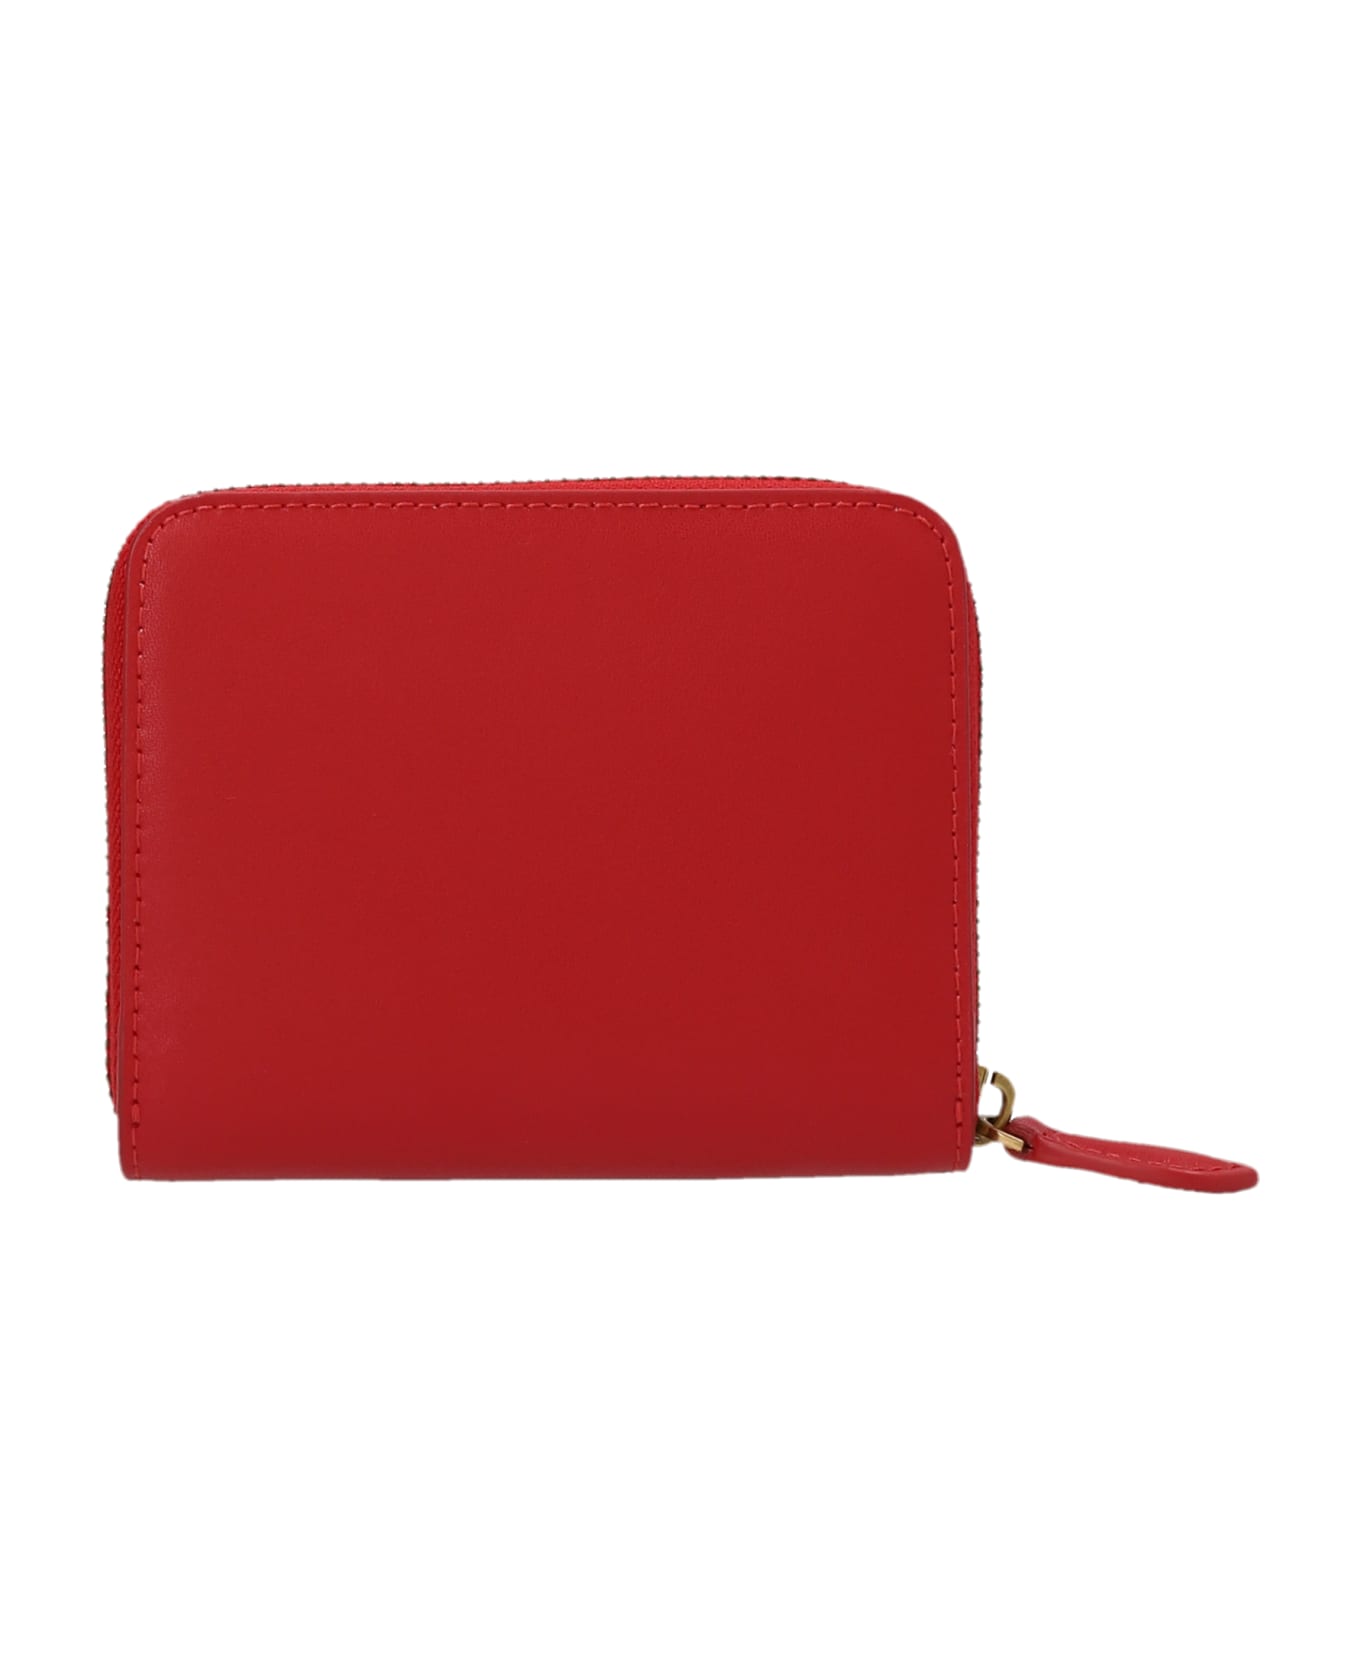 Pinko 'taylor' Wallet - Rosso